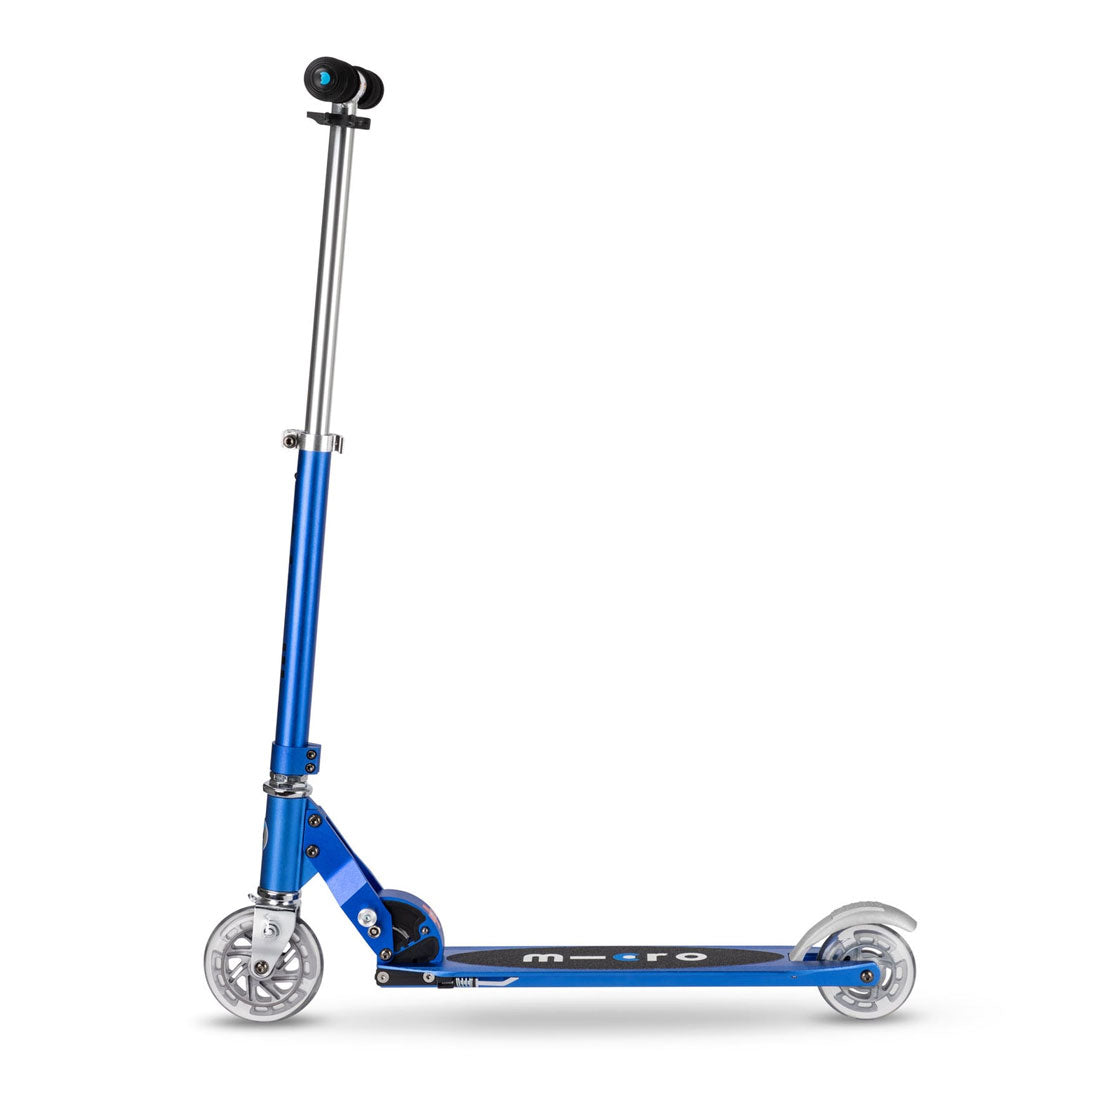 Micro Sprite Scooter - Sapphire Blue Scooter Completes Rec